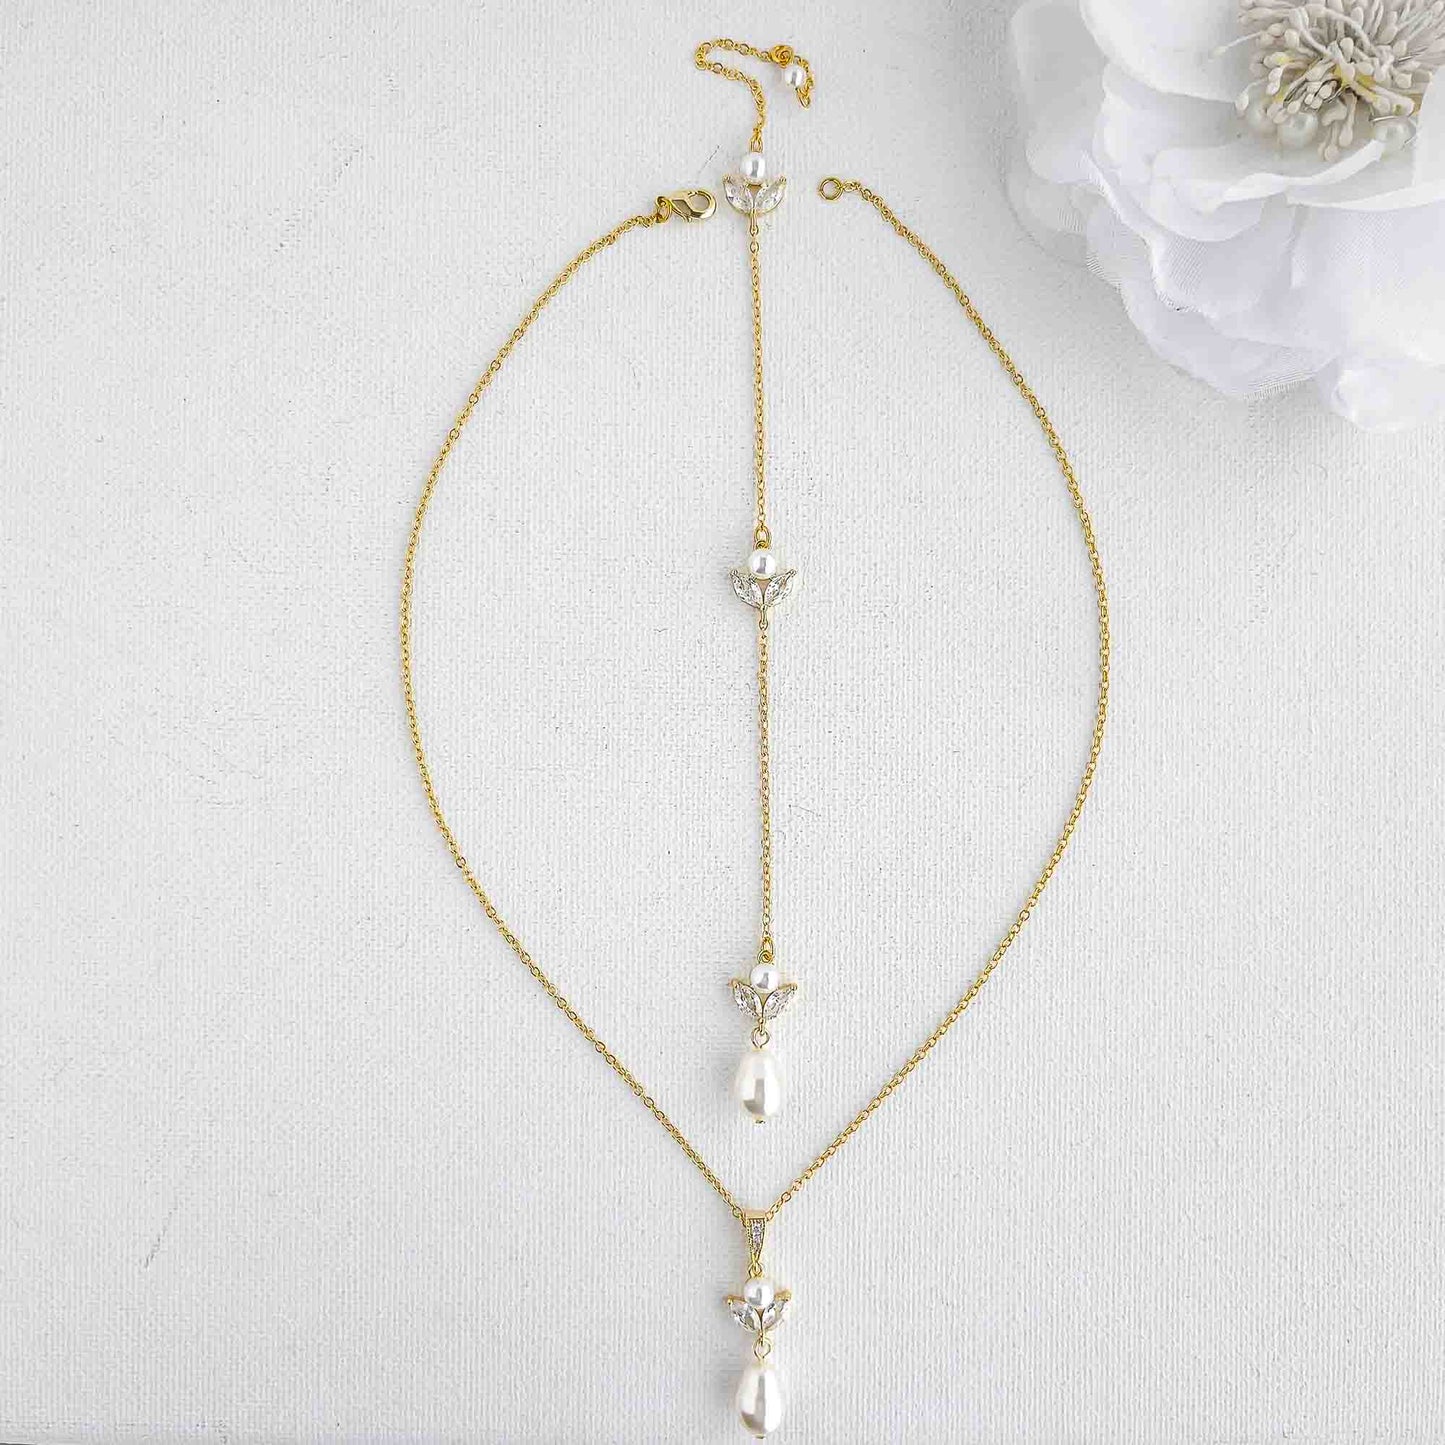 Minimalistic Wedding Necklace with Backdrop for Brides-Leila